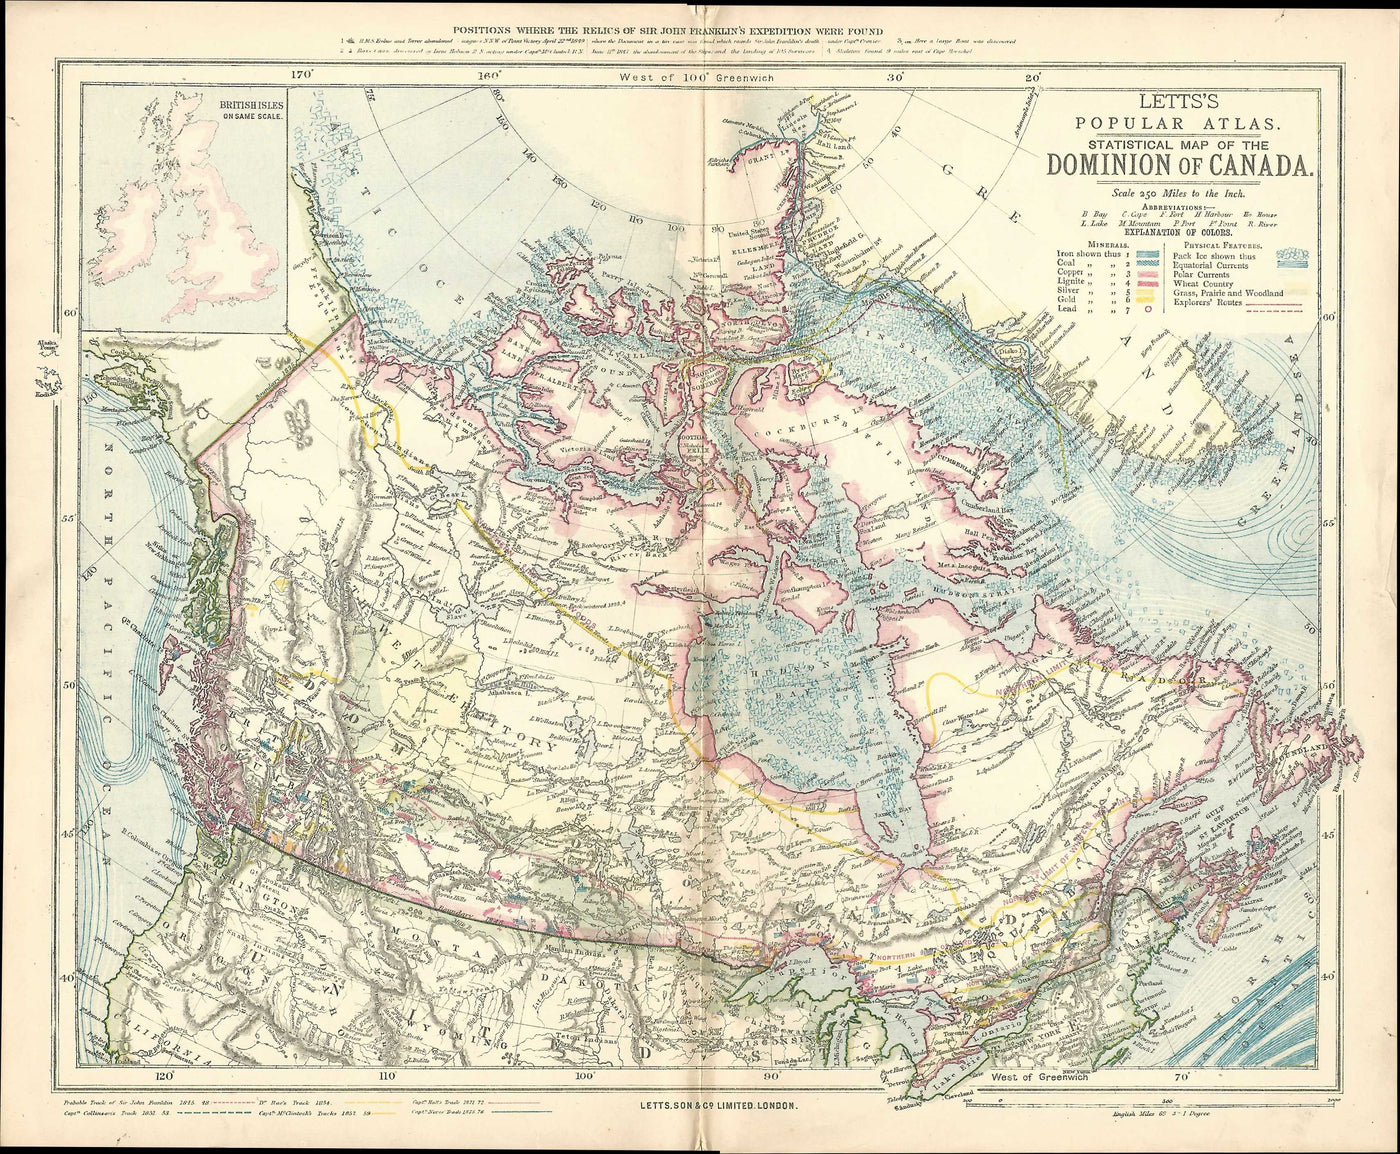 Canada antique map from Letts's Popular Atlas published 1881